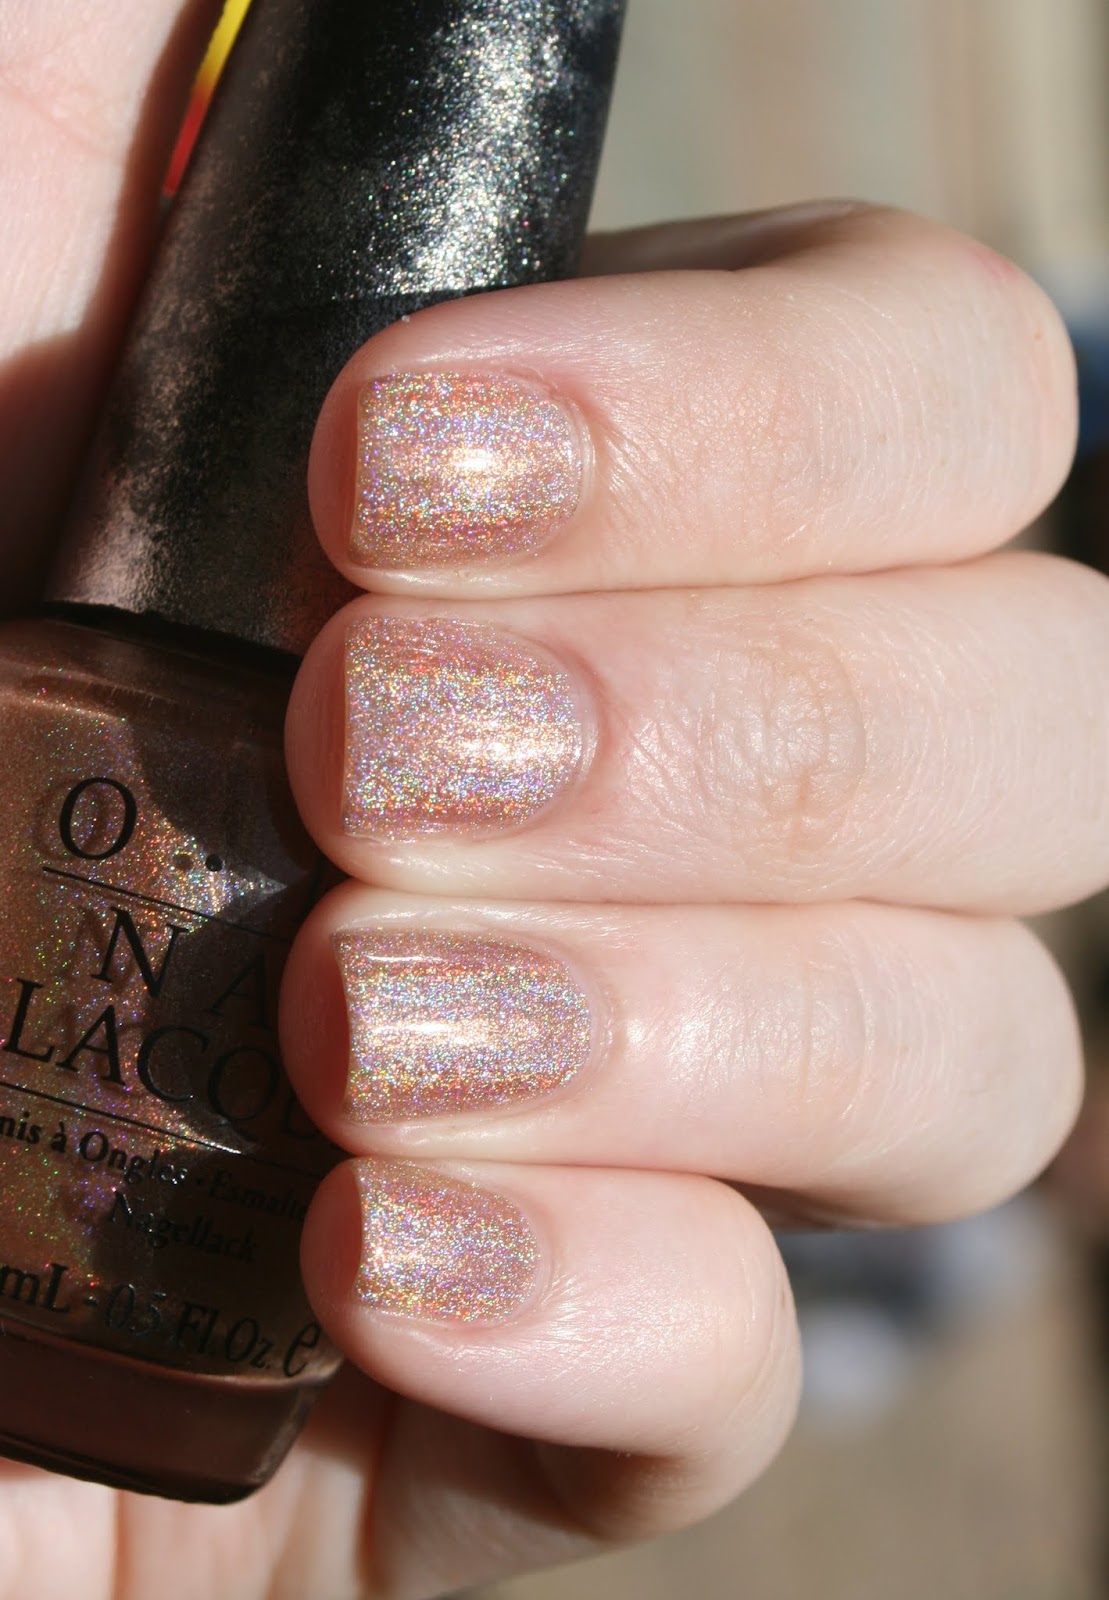 OPI DS Desire swatch